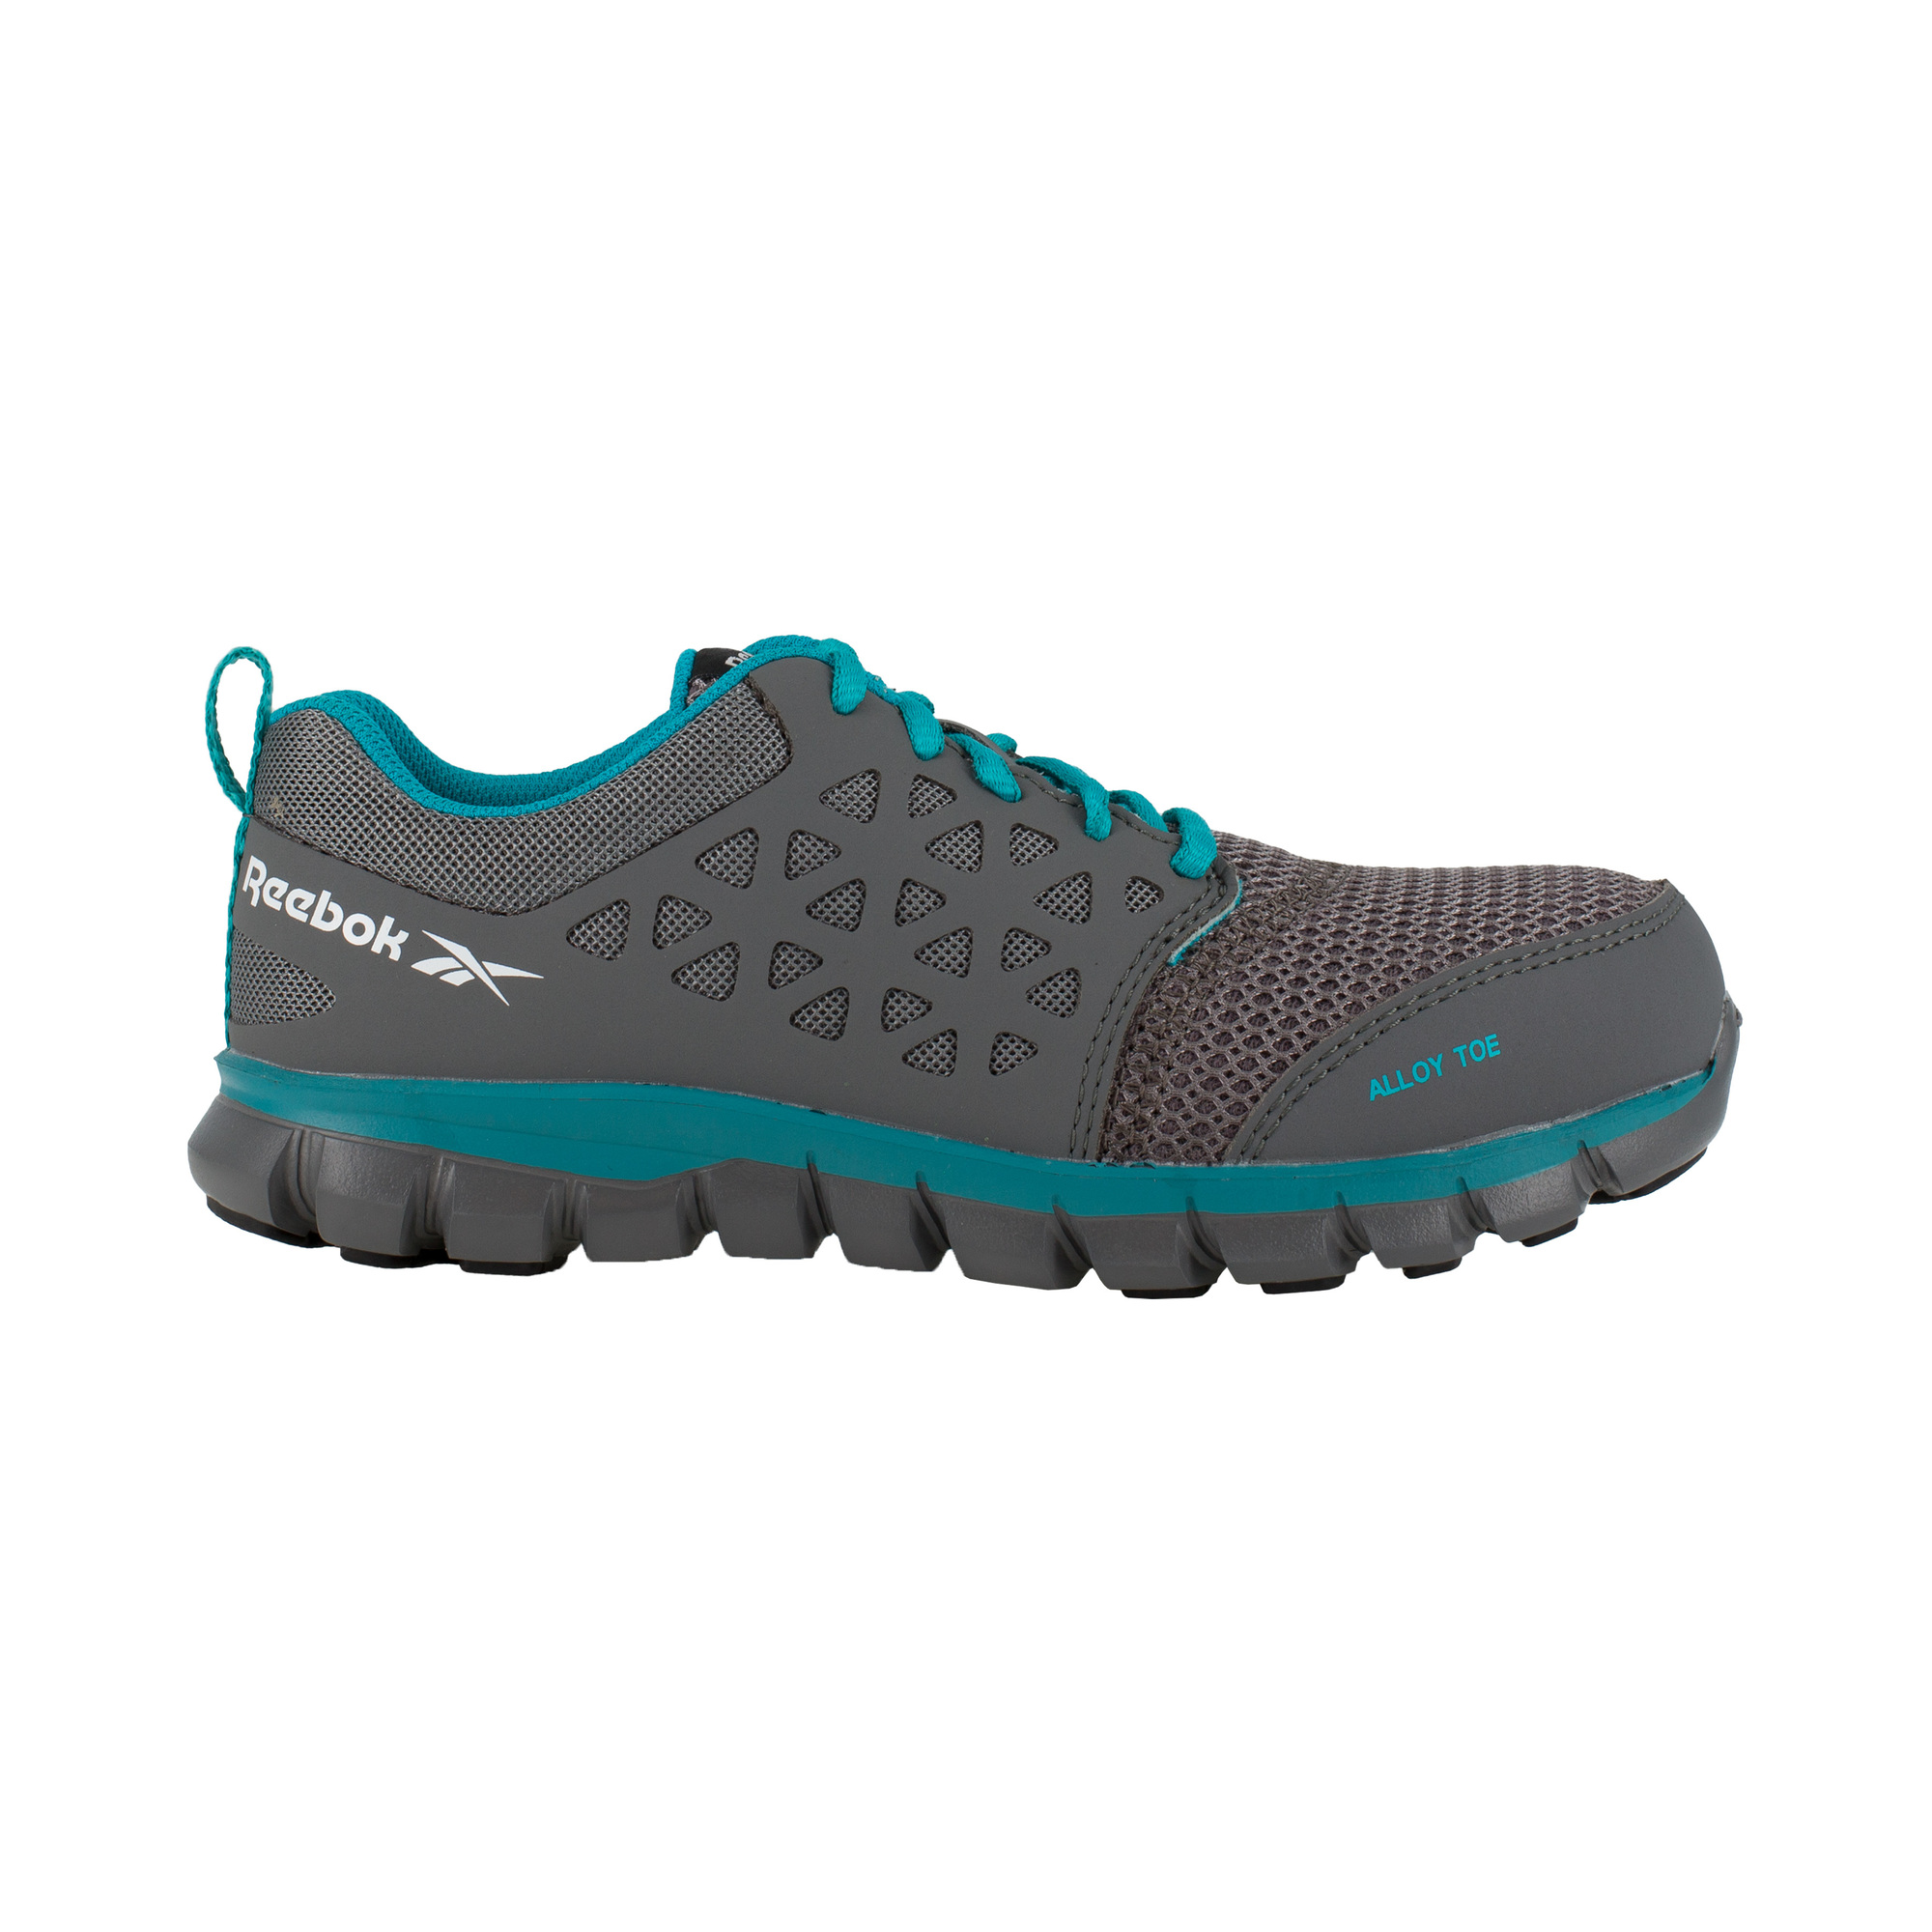 Reebok, Athletic Work Shoe, Size 4, Width Medium, Color Grey and Turquoise, Model RB045